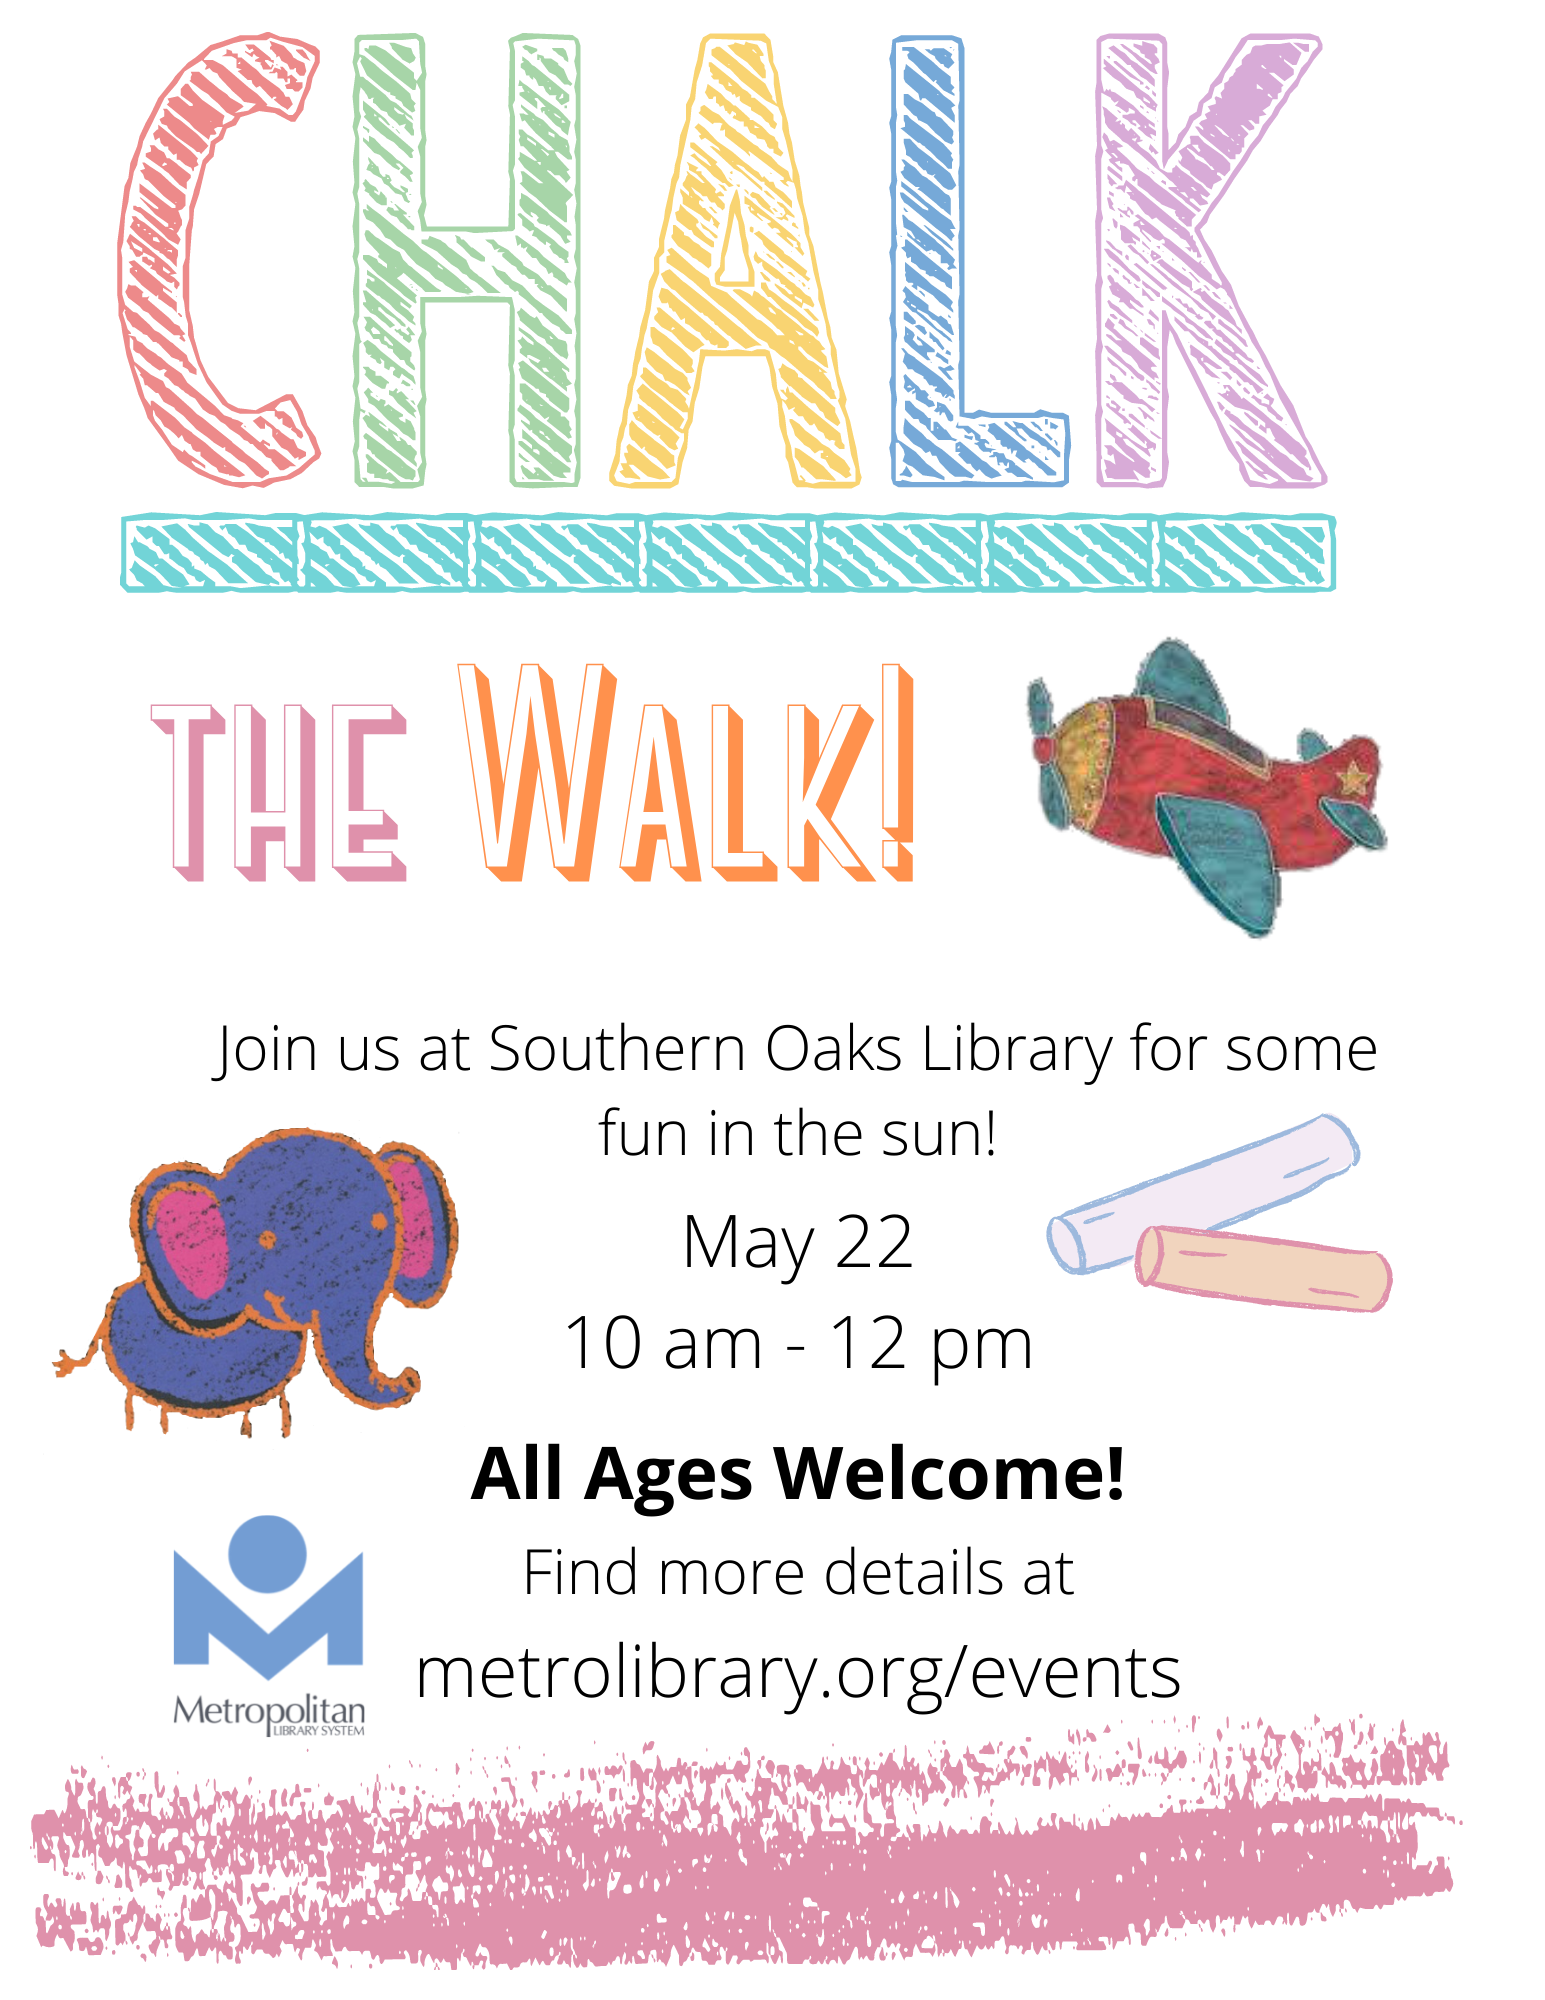 Flyer advertising Chalk the Walk! at Southern Oaks Library. It gives the day and time, May 22 from 10-12, as well as saying that the program is for all ages and that more information can be found at metrolibray.org/events